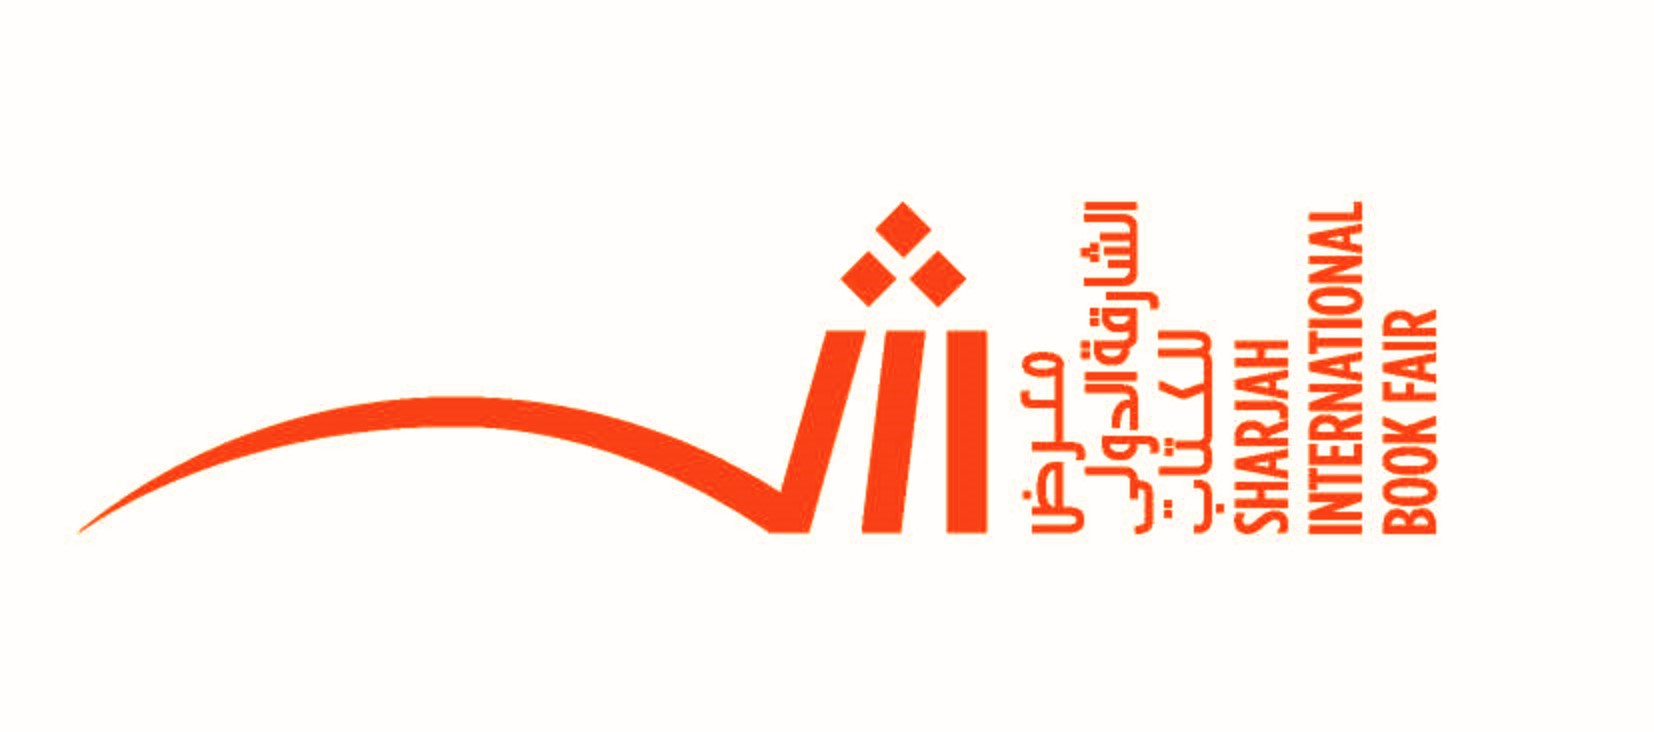 Logo of the Sharjah International Book Fair in Arabic and in English